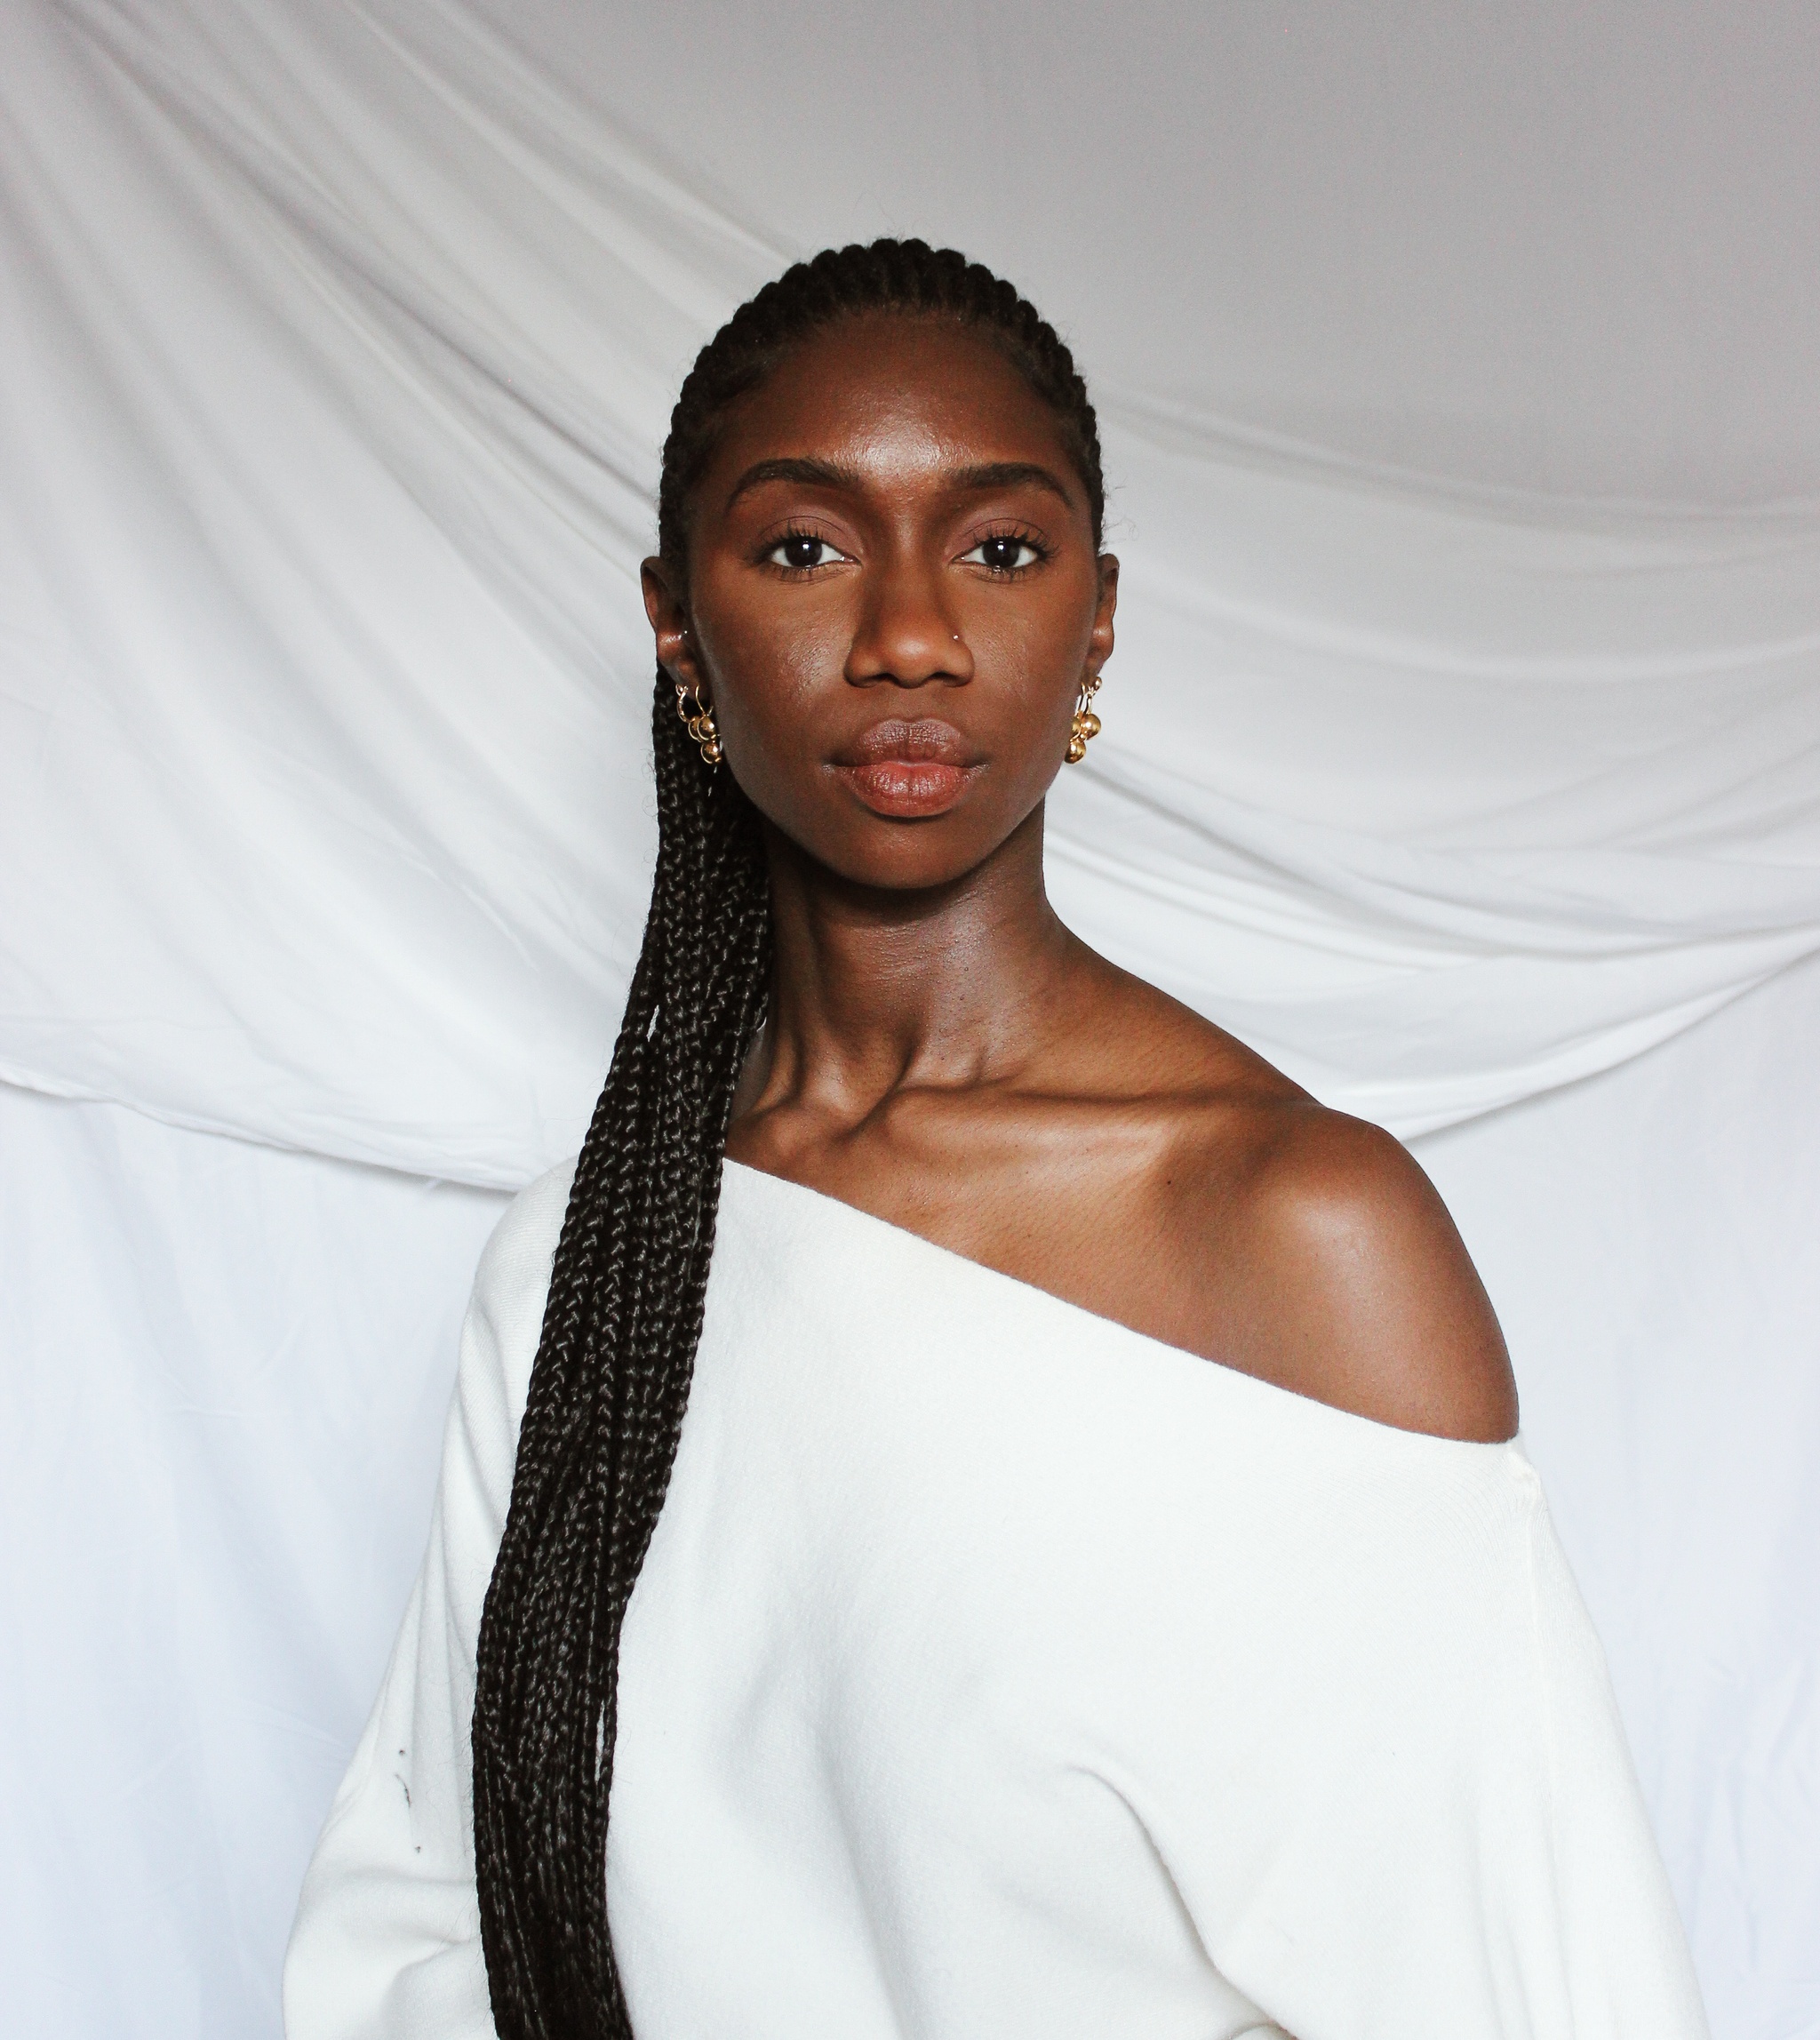 A portrait of Jenée-Daria Strand, a Guyanese American woman with dark brown skin. She wears a white dress with a bias cut neck that reveals one shoulder. Her long braids hang down over her other shoulder. She looks at us calmly without smiling. 